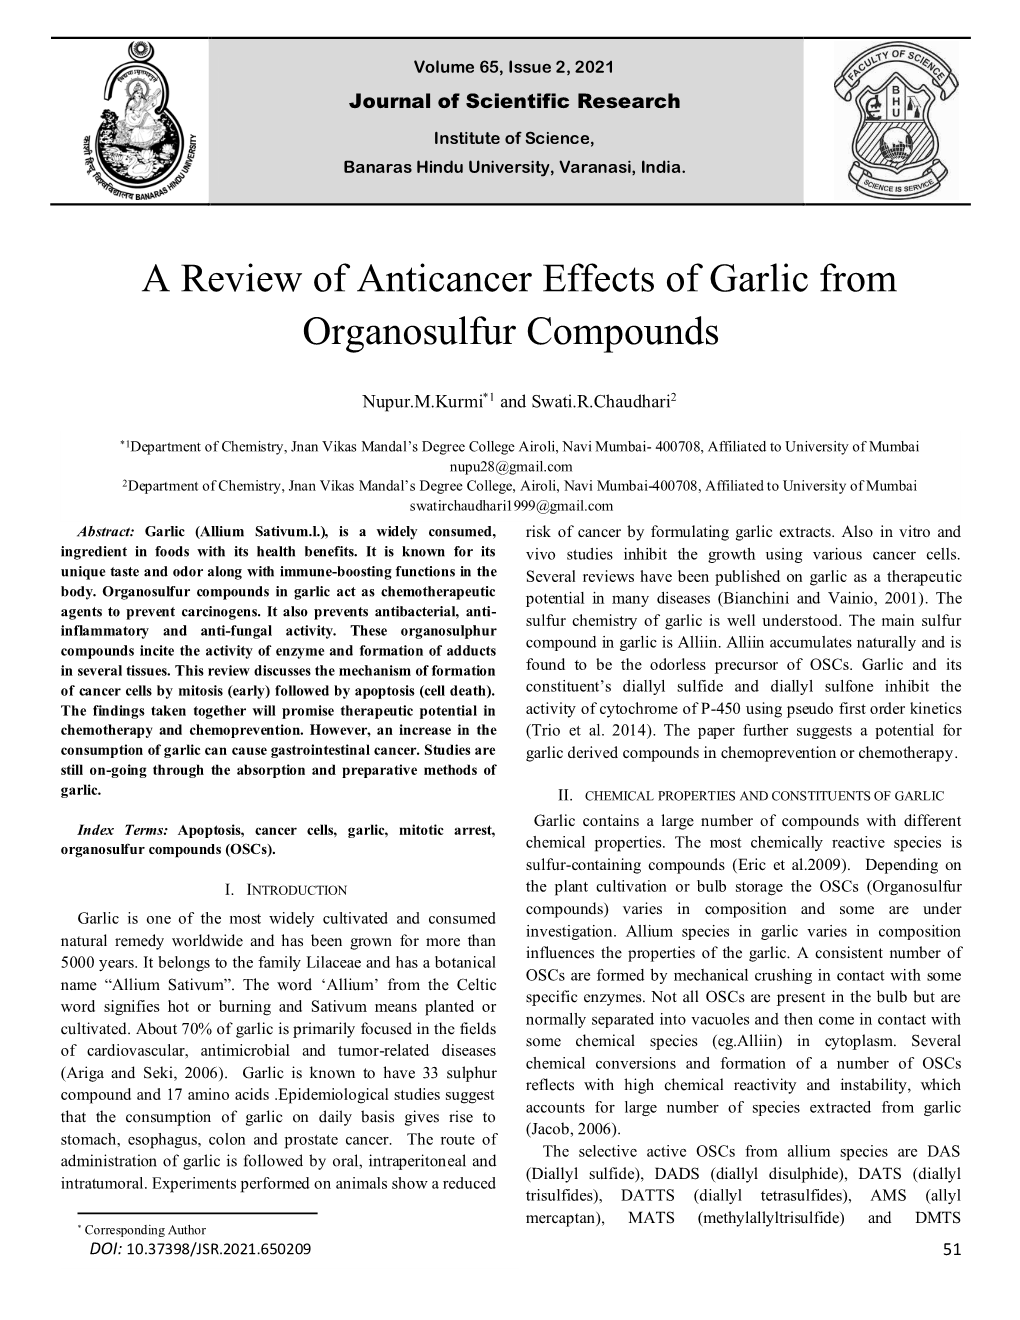 A Review of Anticancer Effects of Garlic from Organosulfur Compounds